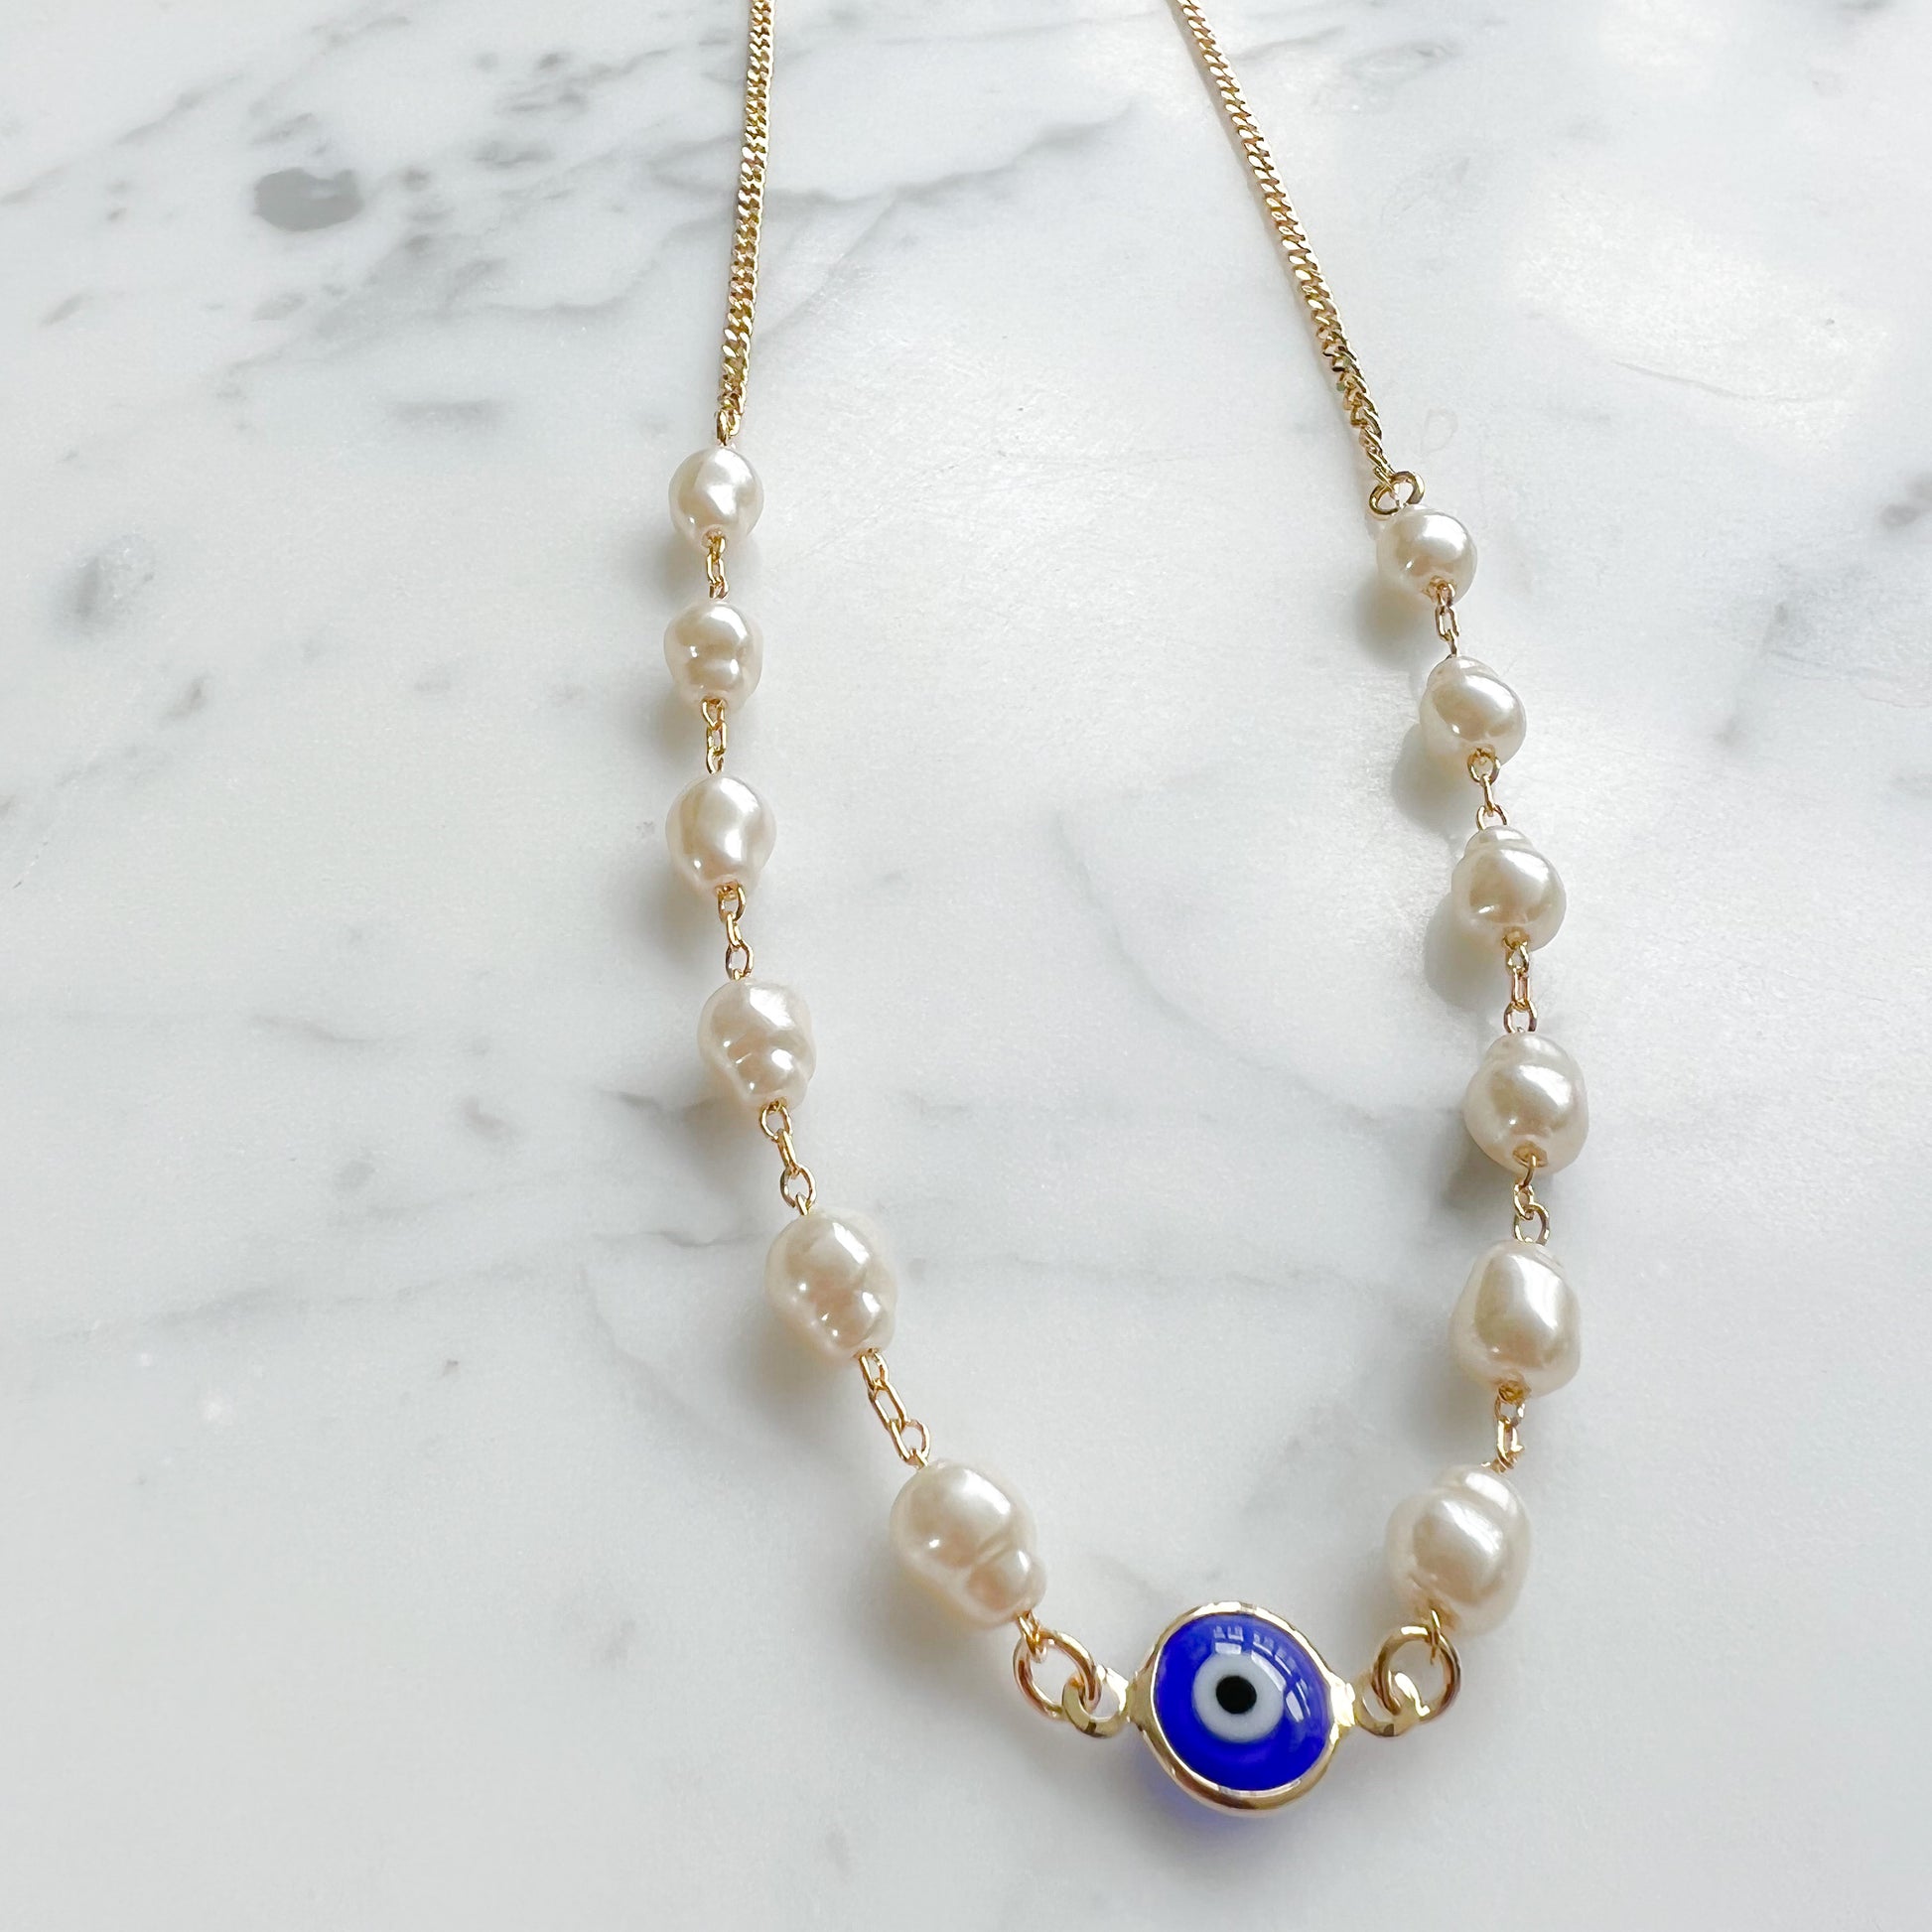 Blue Evil Eye Curb Chain Necklace - BelleStyle